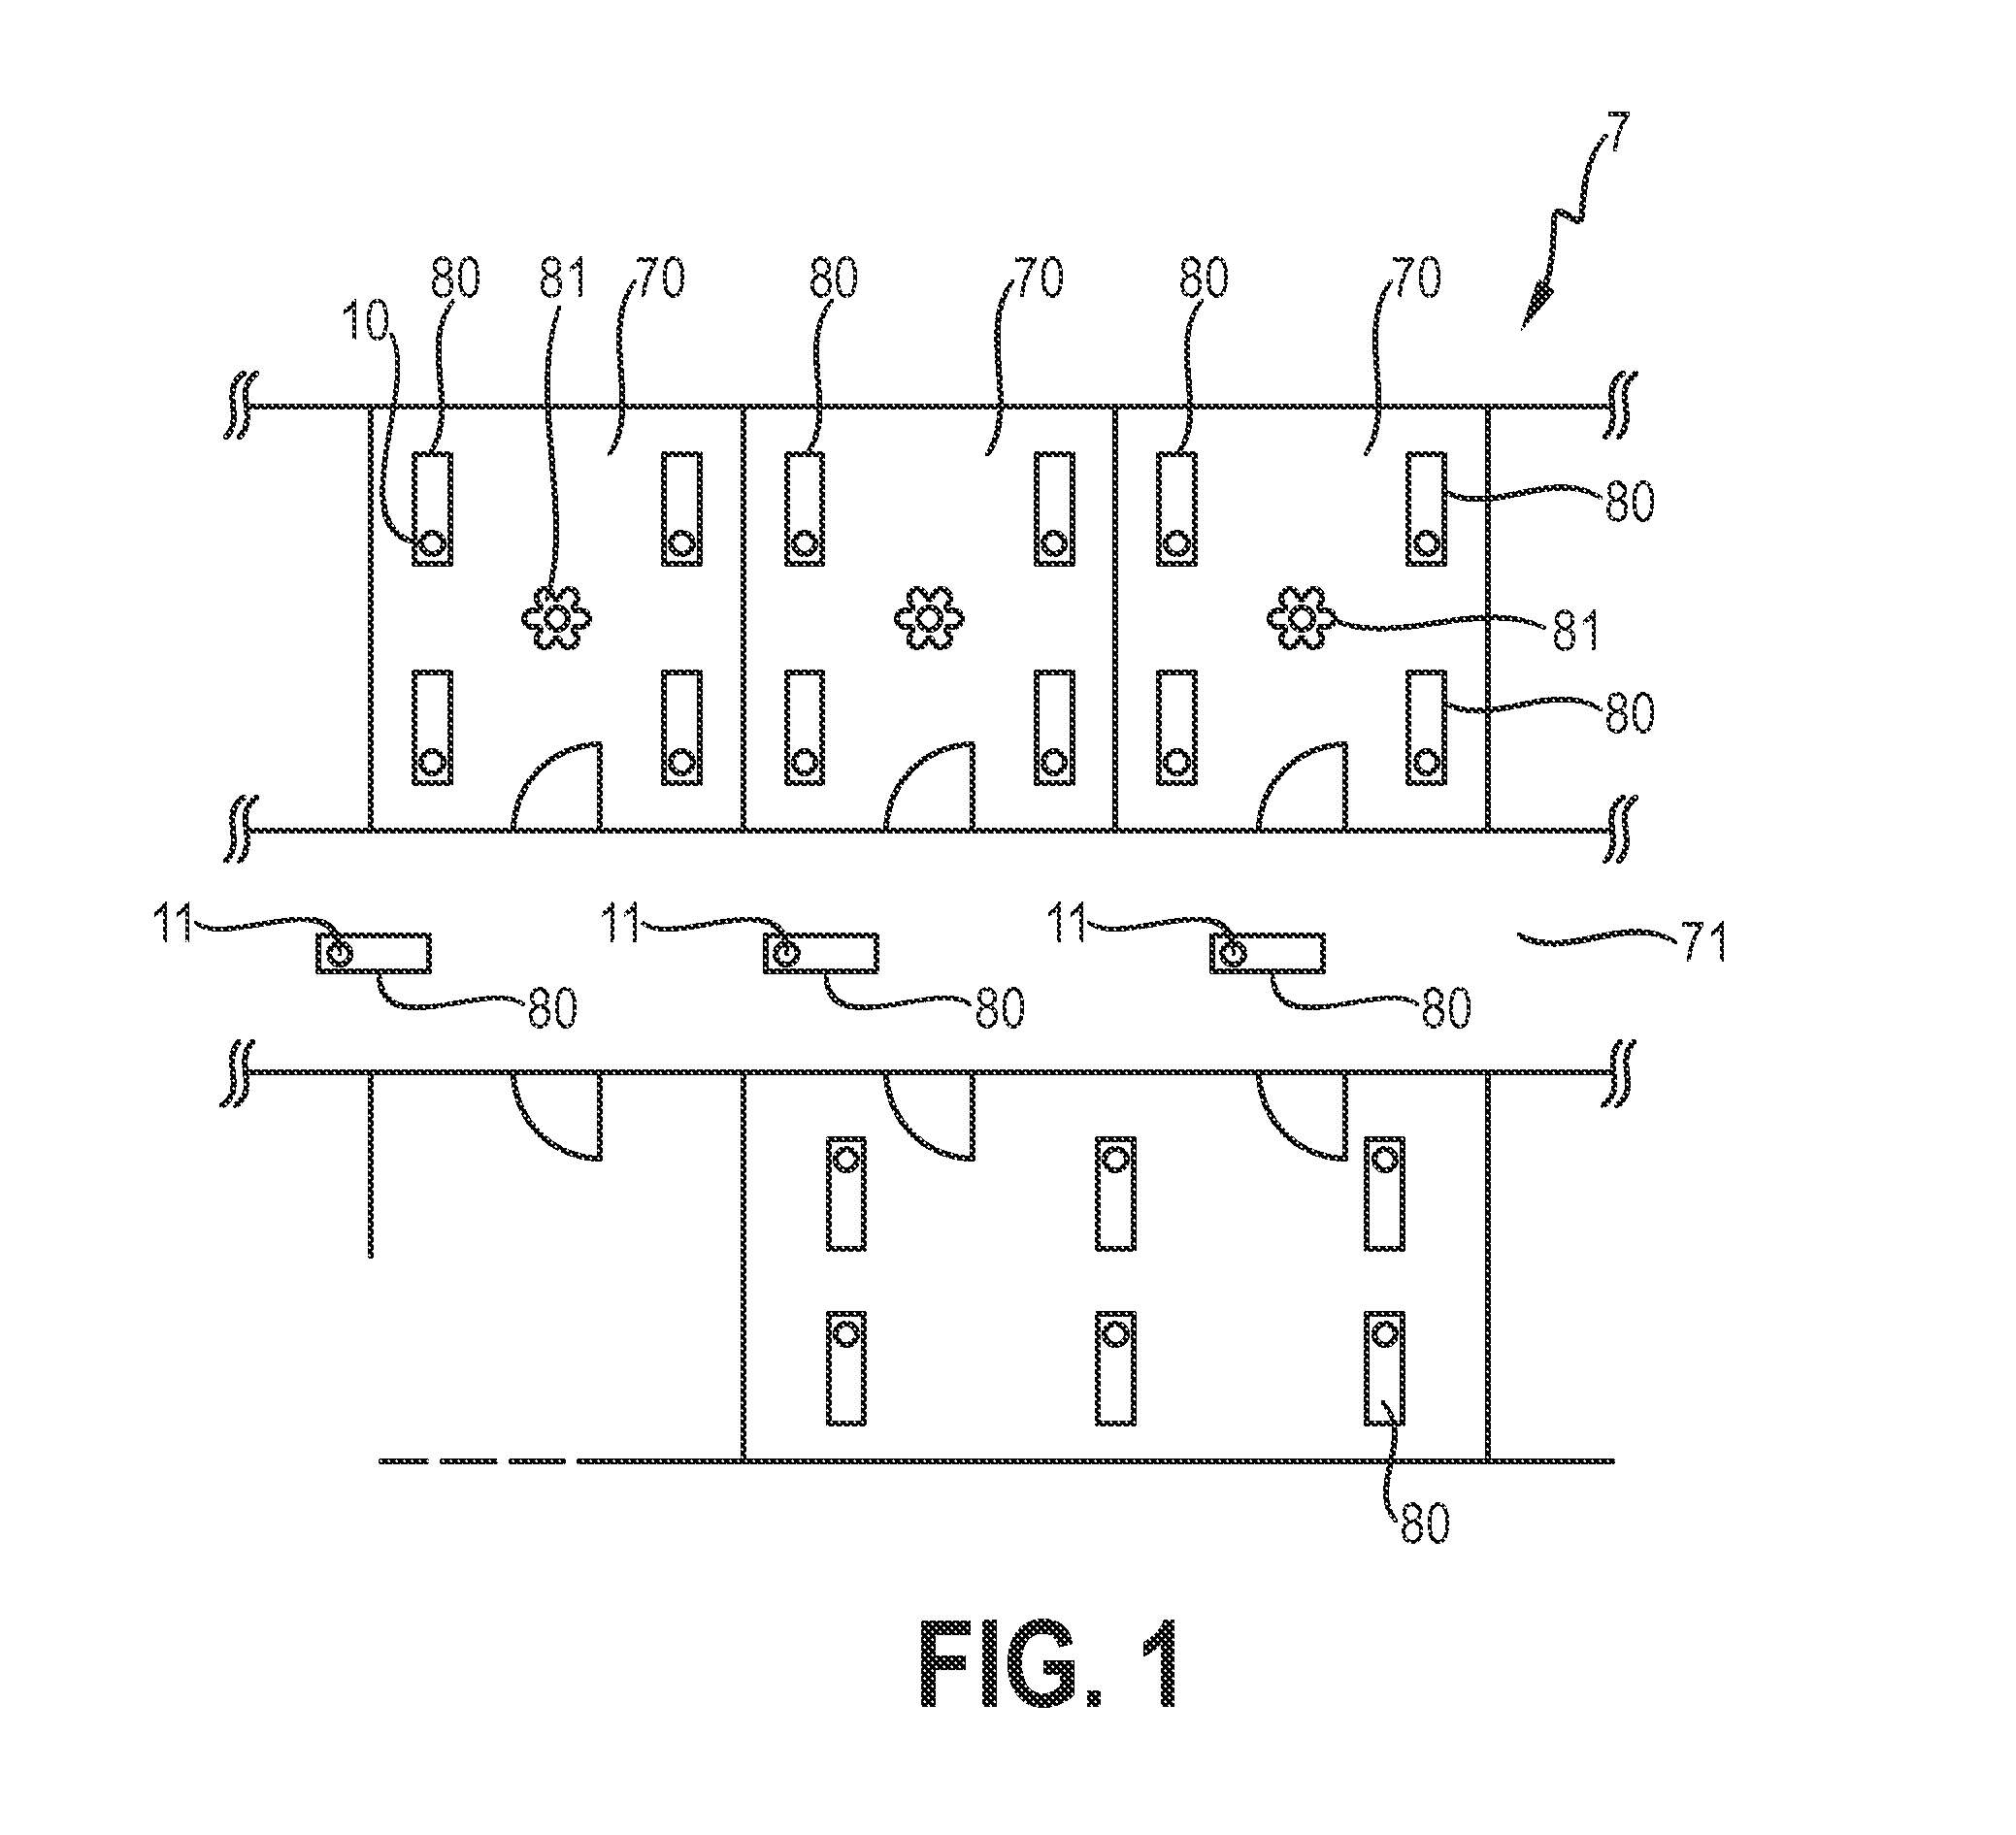 Method of performing automatic commissioning of a network